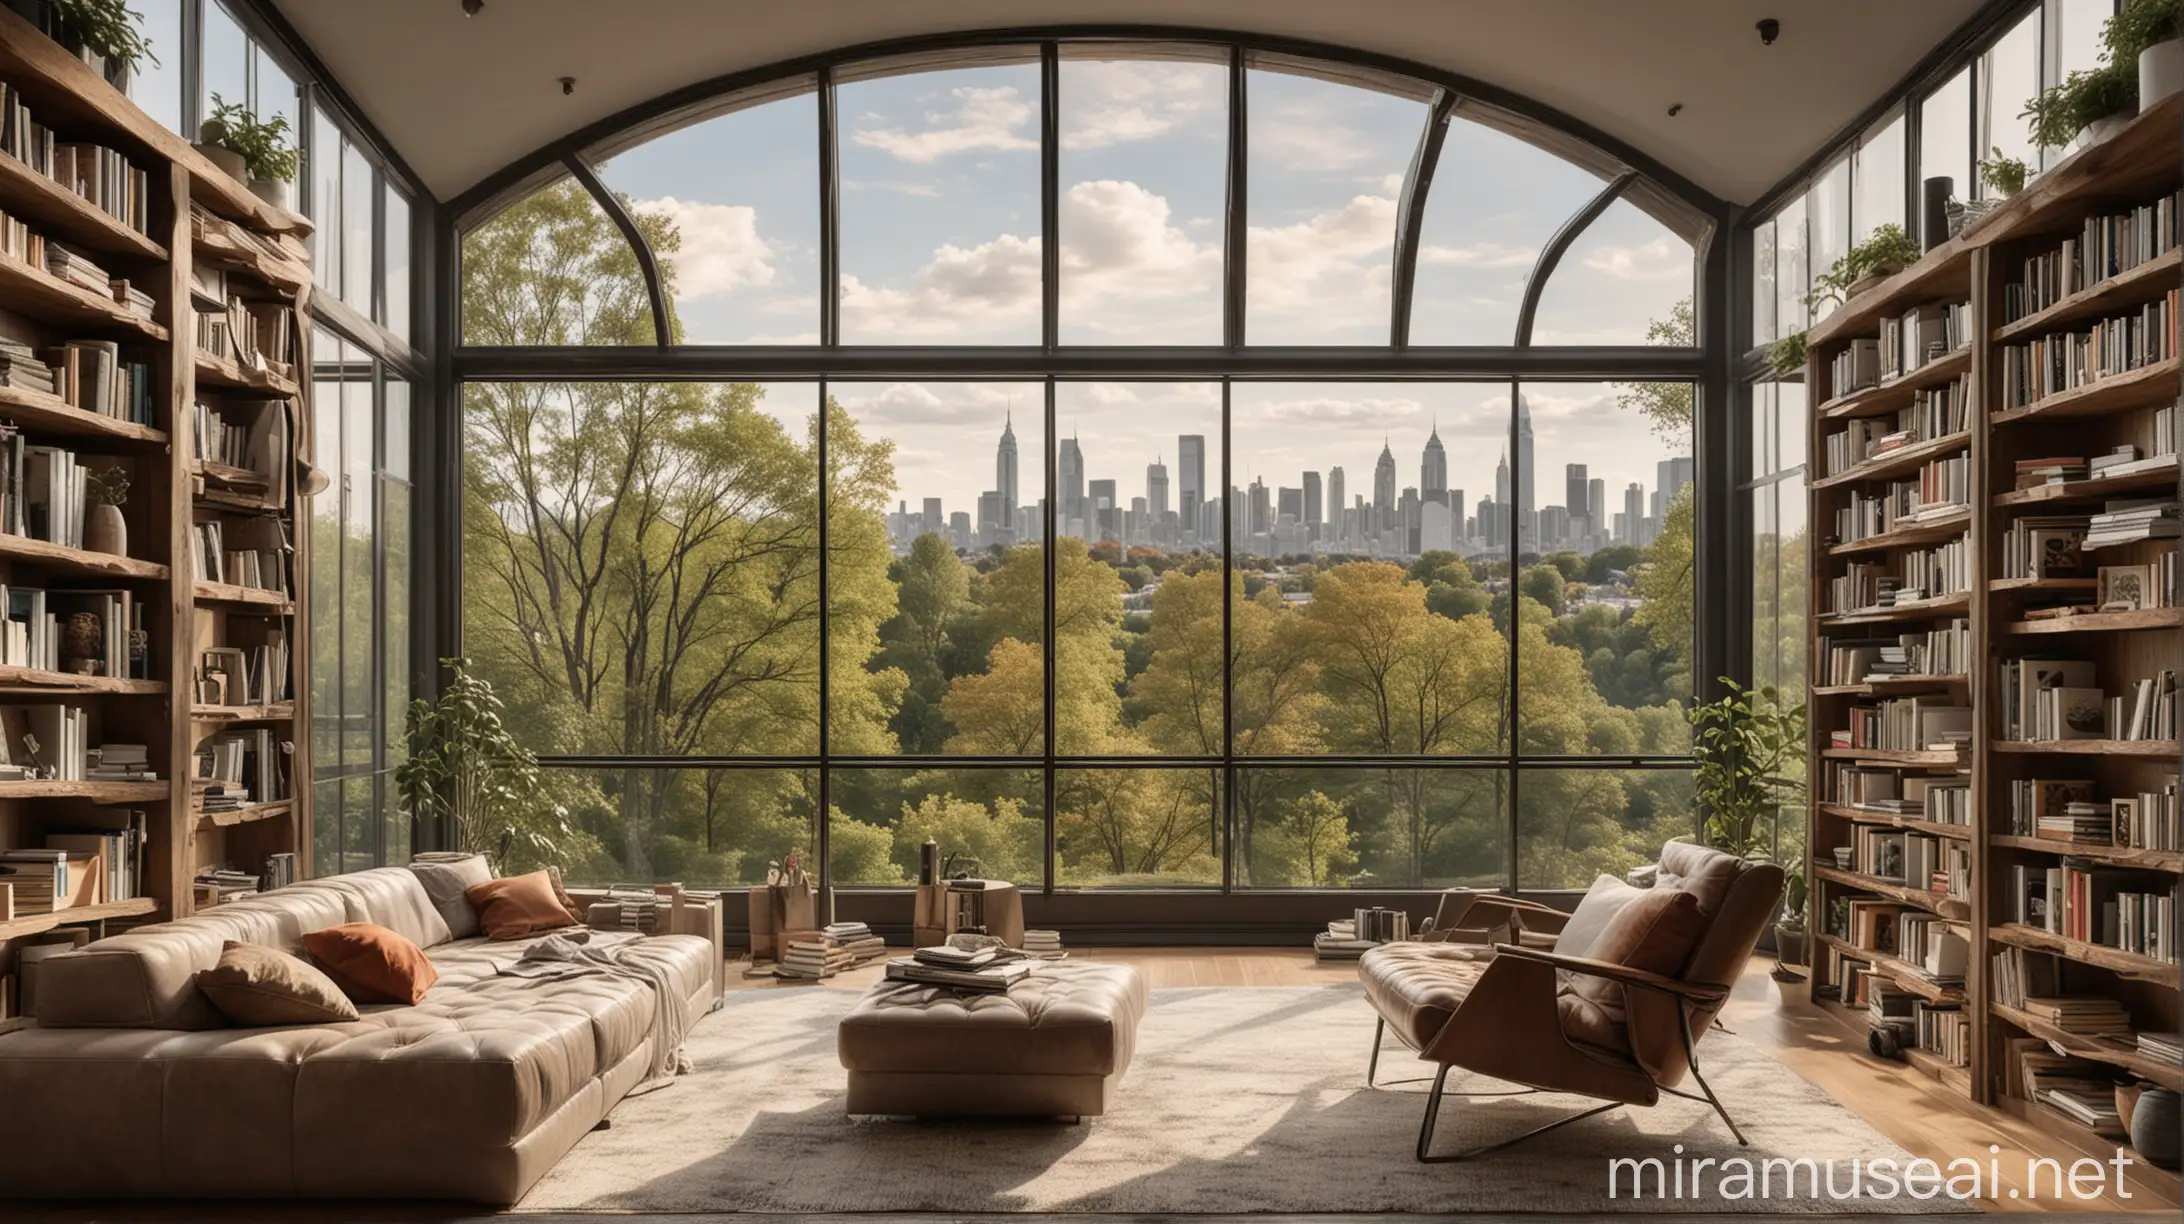 A home library with large windows offering stunning views of nature or the cityscape.